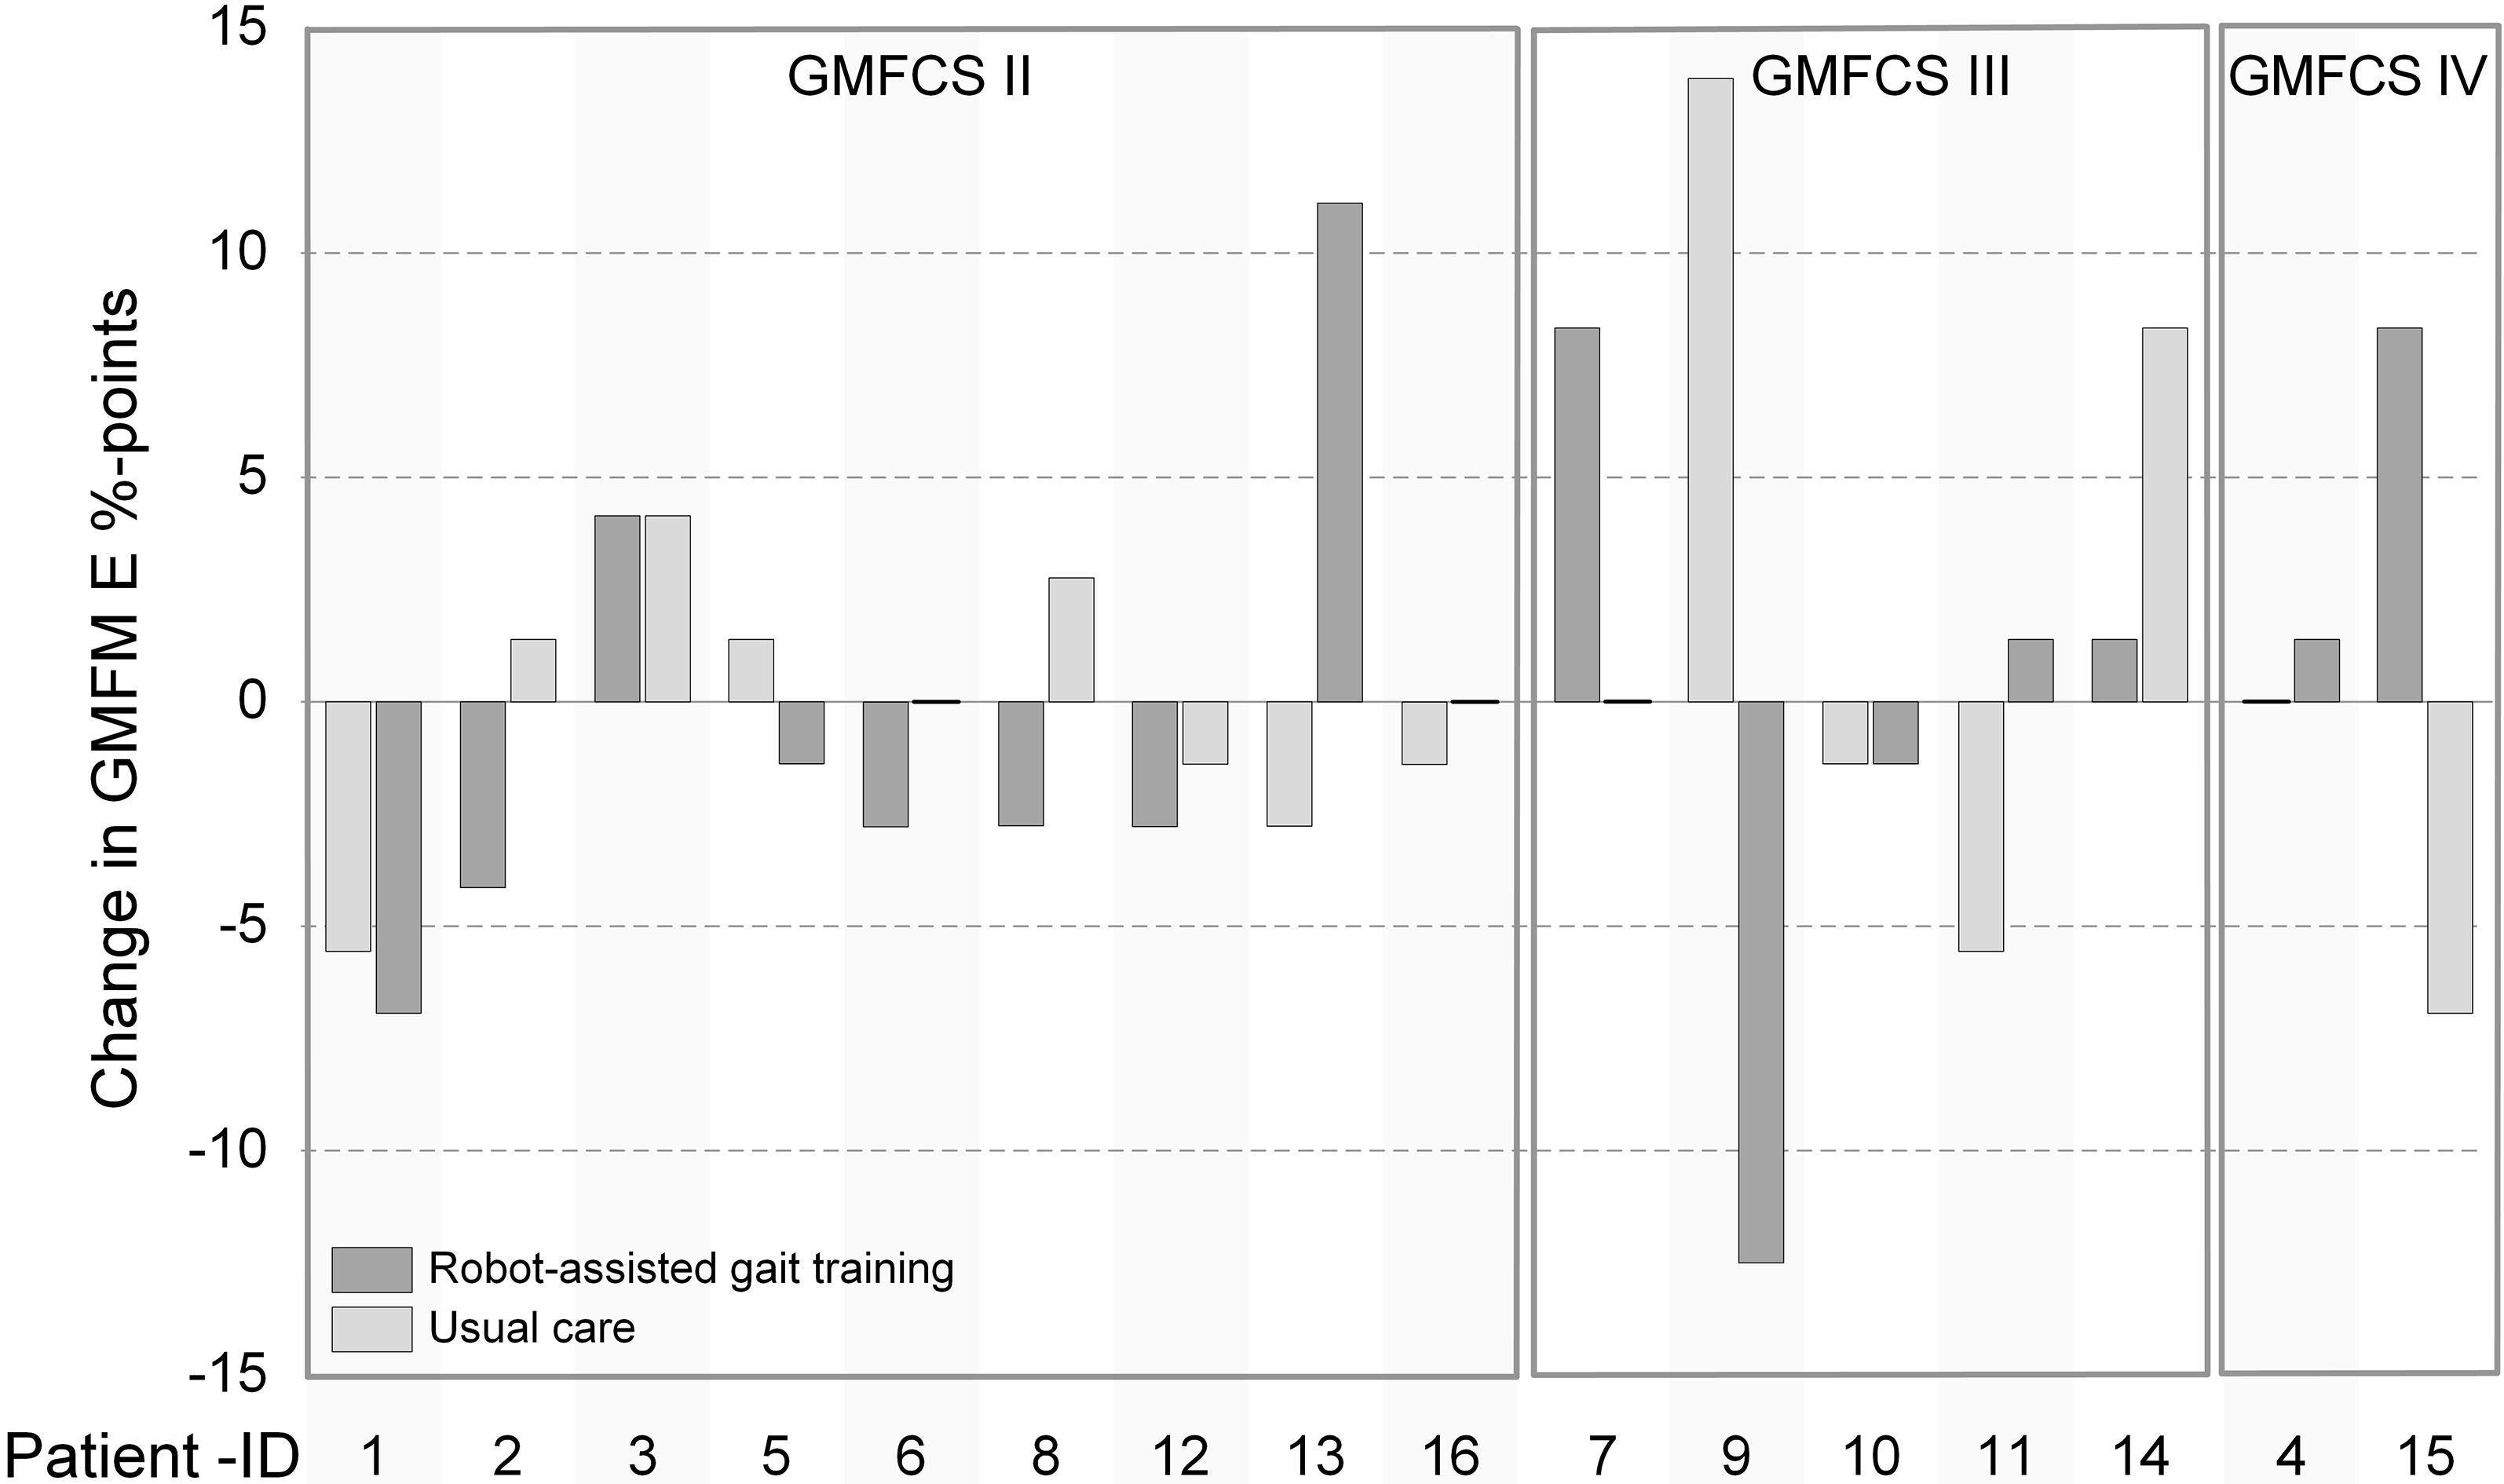 Individual effects of robot-assisted gait training (RAGT) and usual care on Gross Motor Function Measure dimension E (GMFM E) change scores. The order of the bars reflects the chronological sequence of the treatment. GMFCS, Gross Motor Function Classification Level.